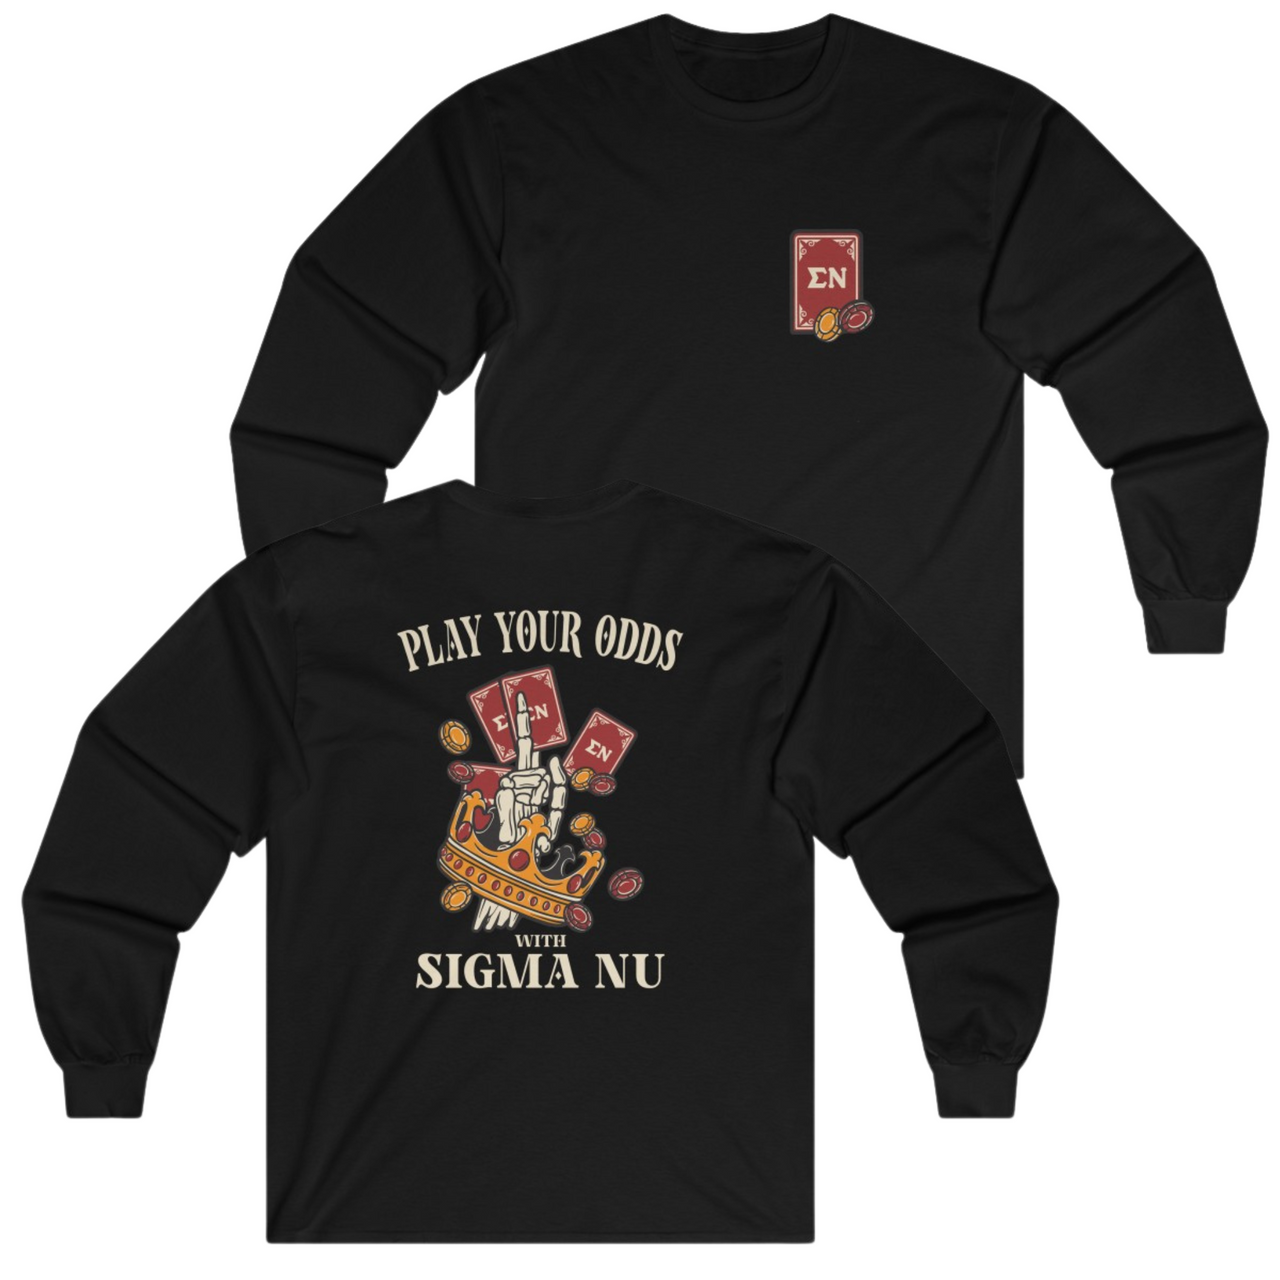 Black Sigma Nu Graphic Long Sleeve | Play Your Odds | Sigma Nu Clothing, Apparel and Merchandise